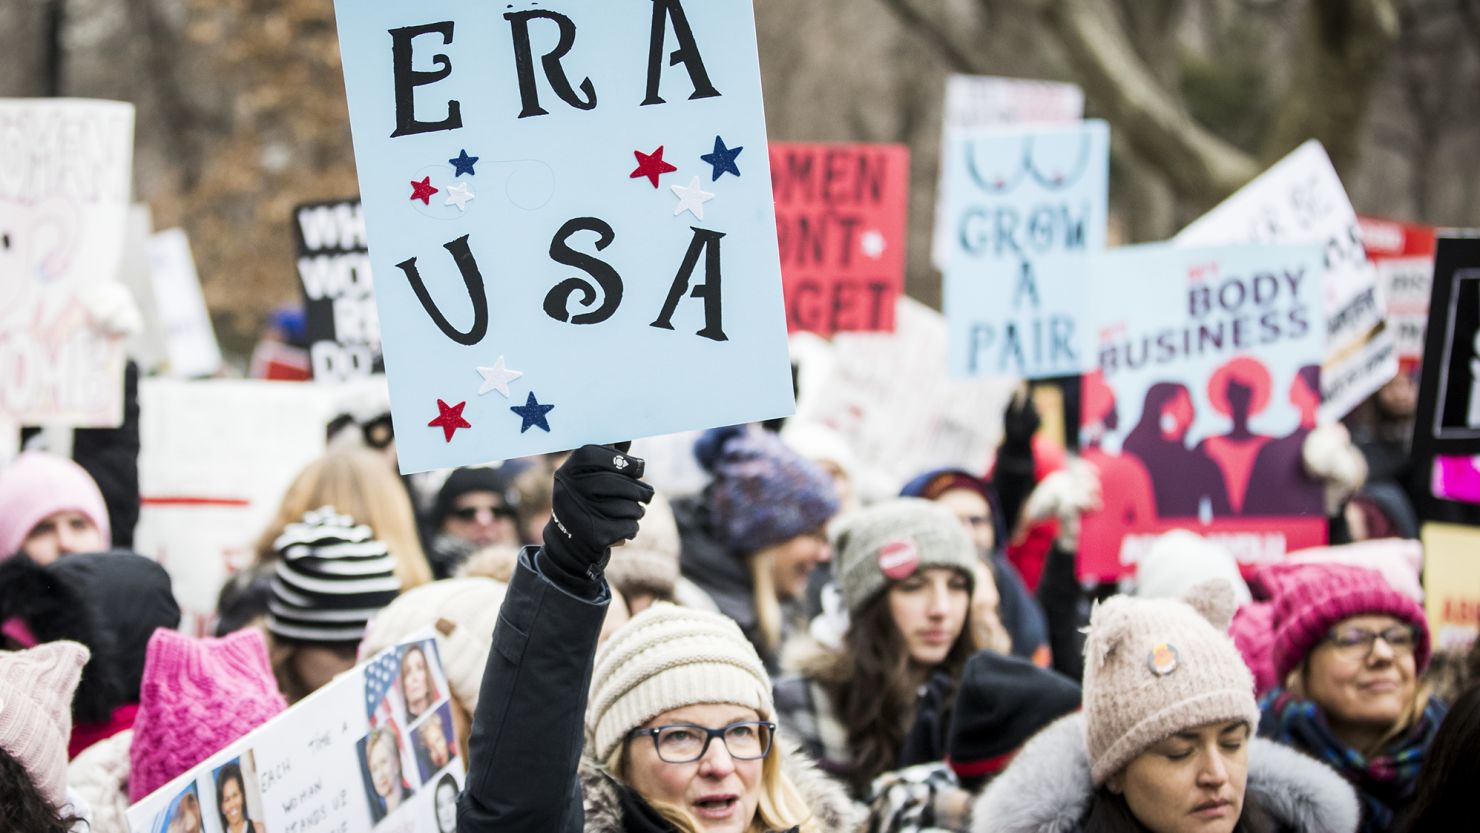 A marcher holds a sign that say "ERA USA" during the Woman's March in the borough of Manhattan in New York on January 18, 2020.